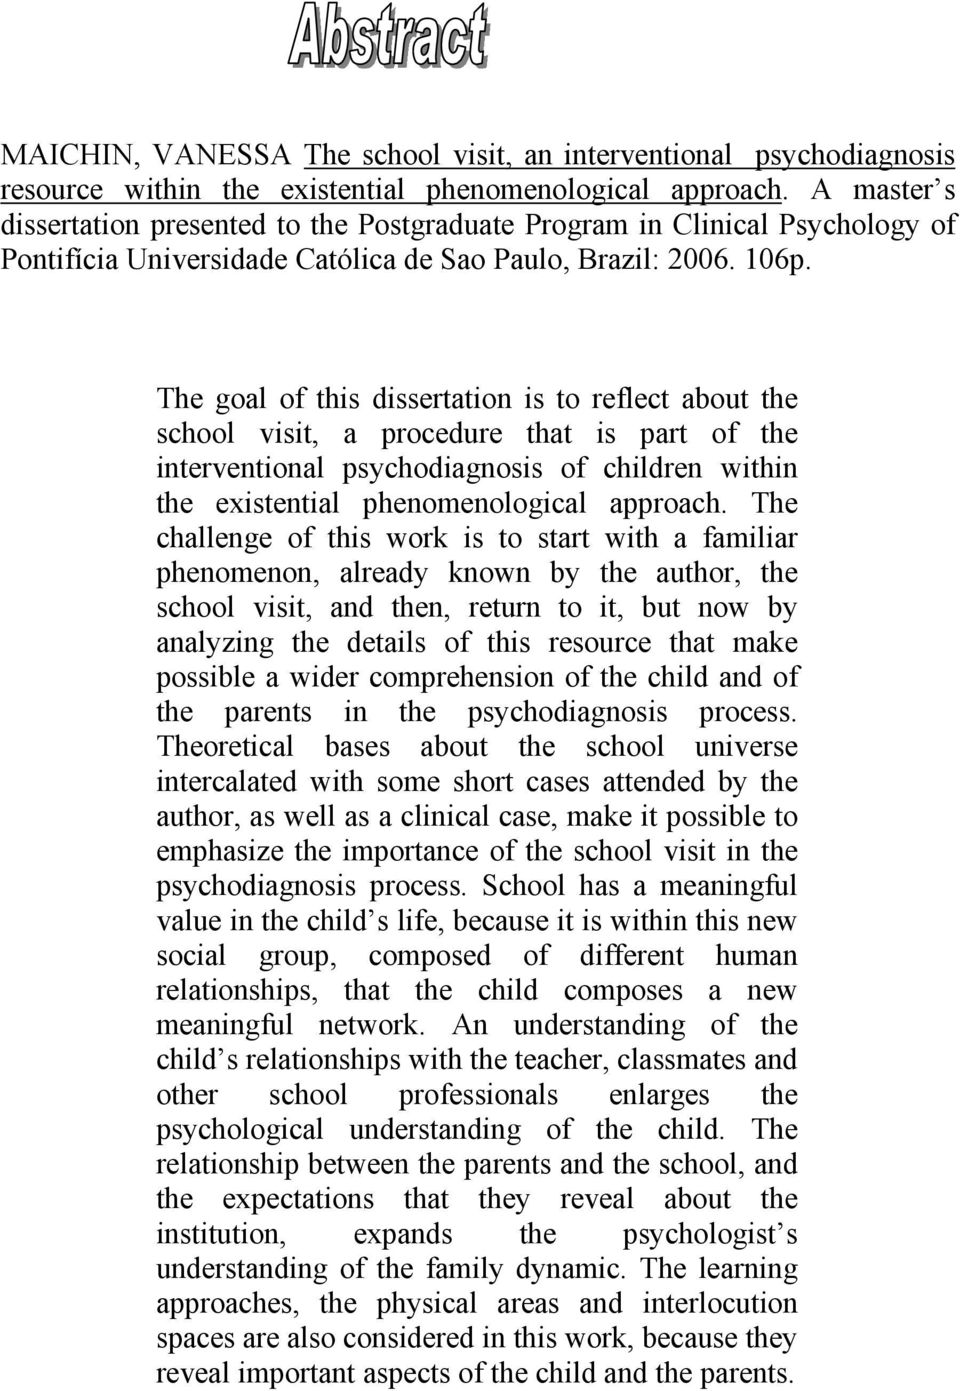 The goal of this dissertation is to reflect about the school visit, a procedure that is part of the interventional psychodiagnosis of children within the existential phenomenological approach.